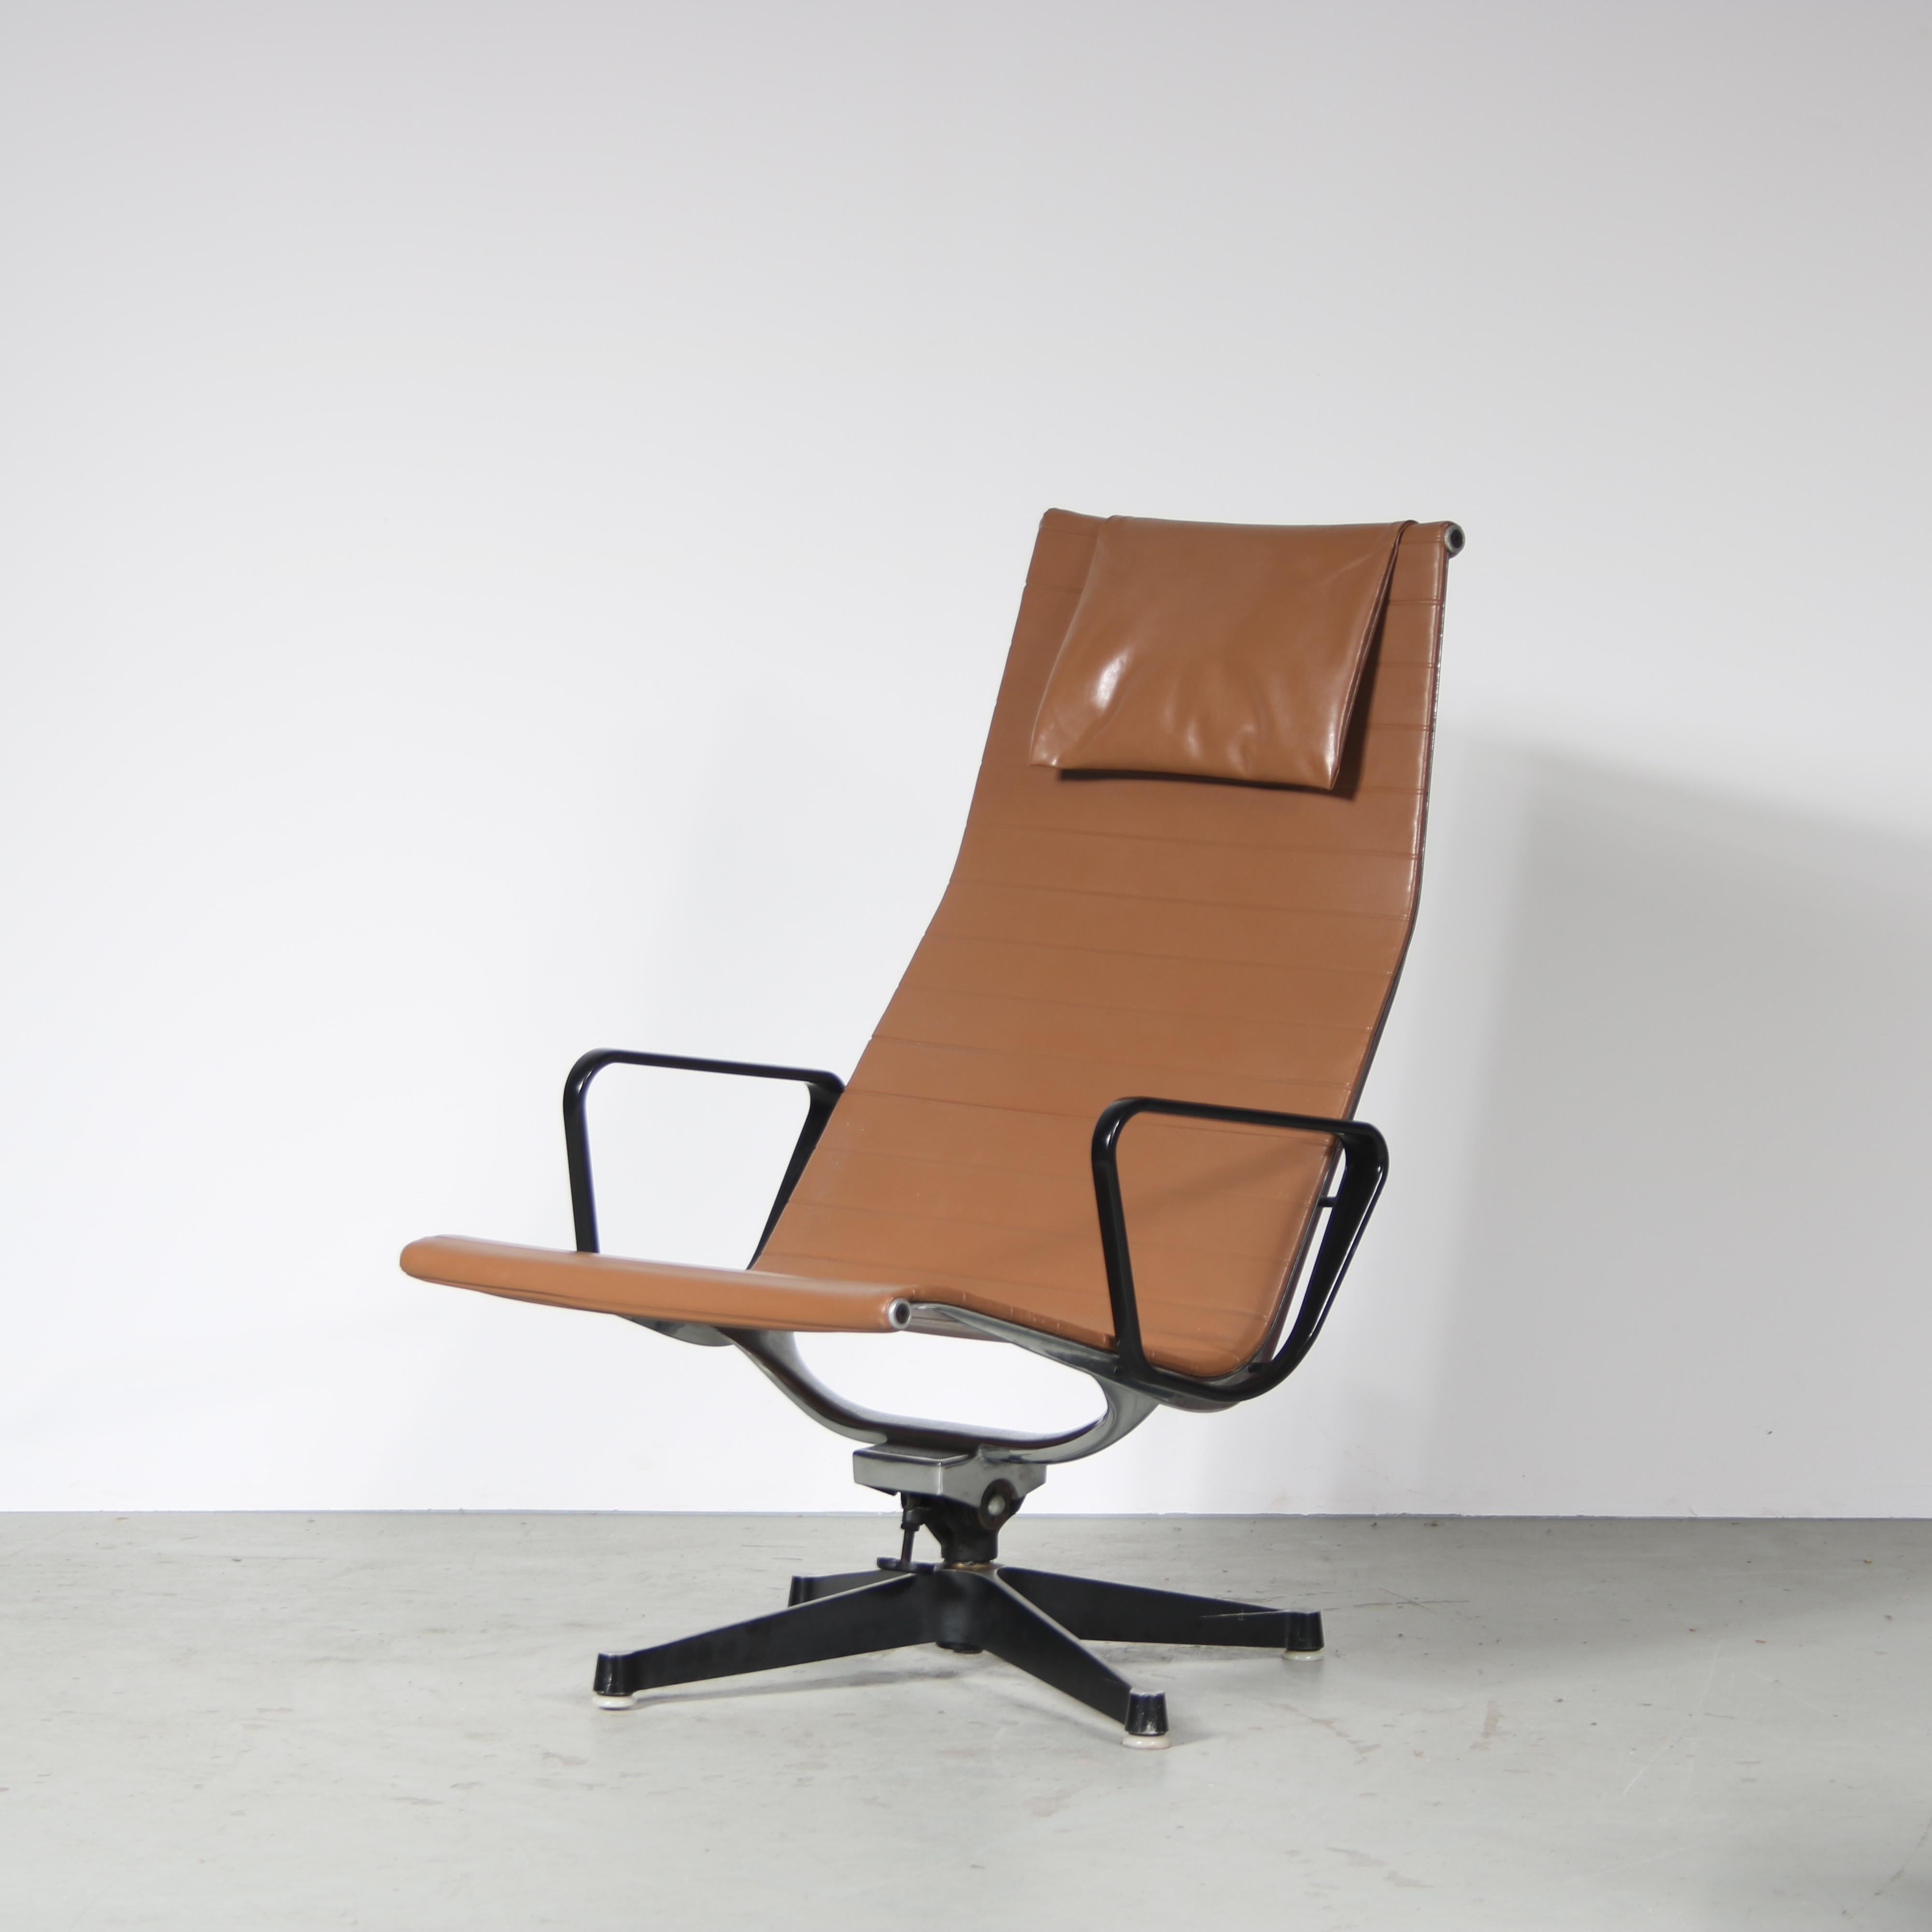 

A wonderful lounge chair, model EA 124, designed by Charles & Ray Eames and manufactured by Herman Miller in the USA around 1960.

This eye-catching chair is a highly recognizable piece of mid-century design! It has a grey with black lacquered